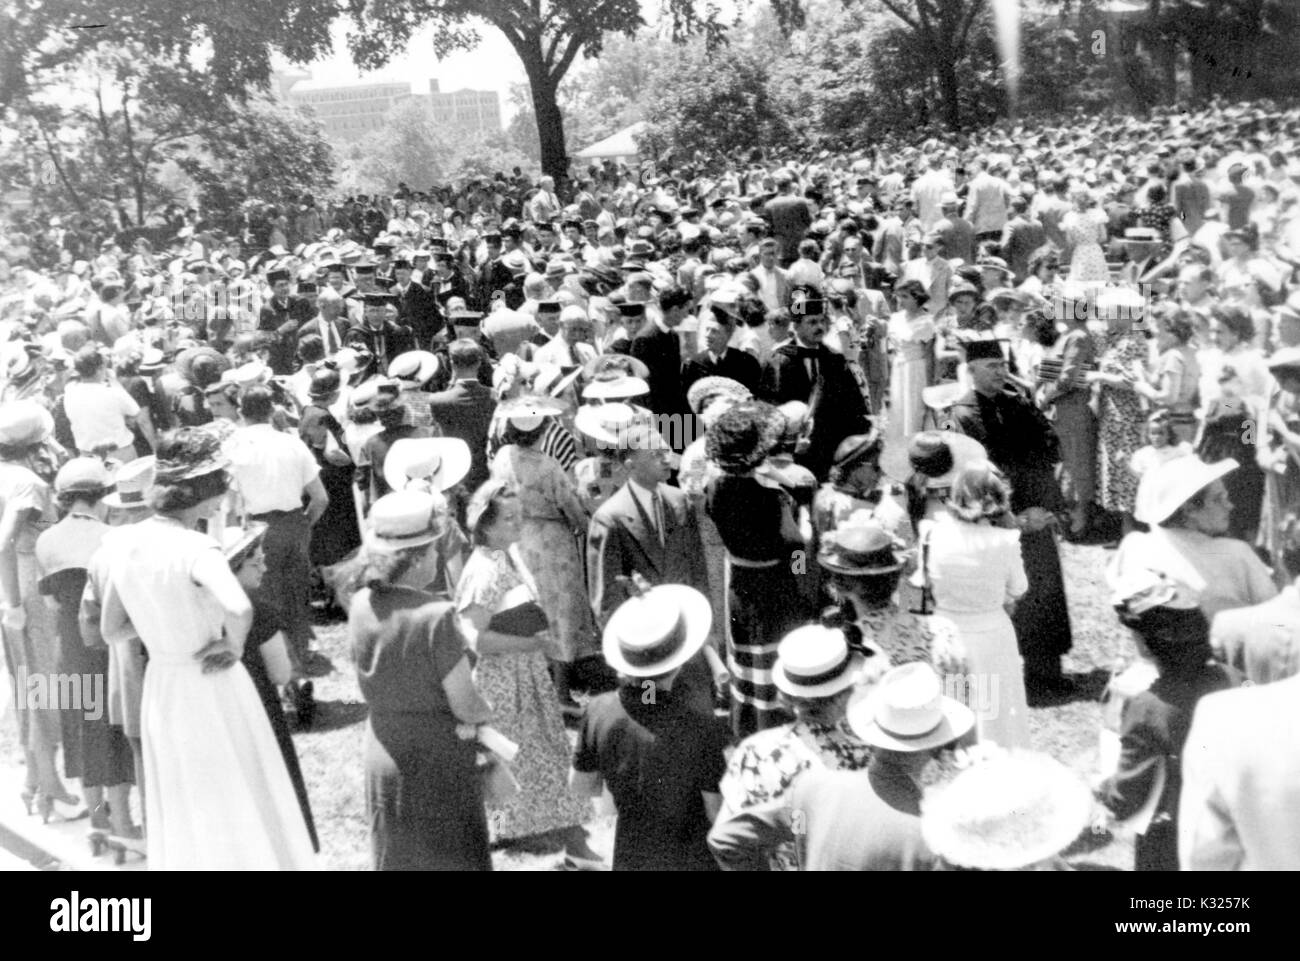 On Commencement Day, a large crowd of family, friends, and guests stand outdoors in clusters watching an aisle of graduates and faculty members proceed together wearing caps, gowns, and robes, Johns Hopkins University, Baltimore, Maryland, June, 1949. Stock Photo